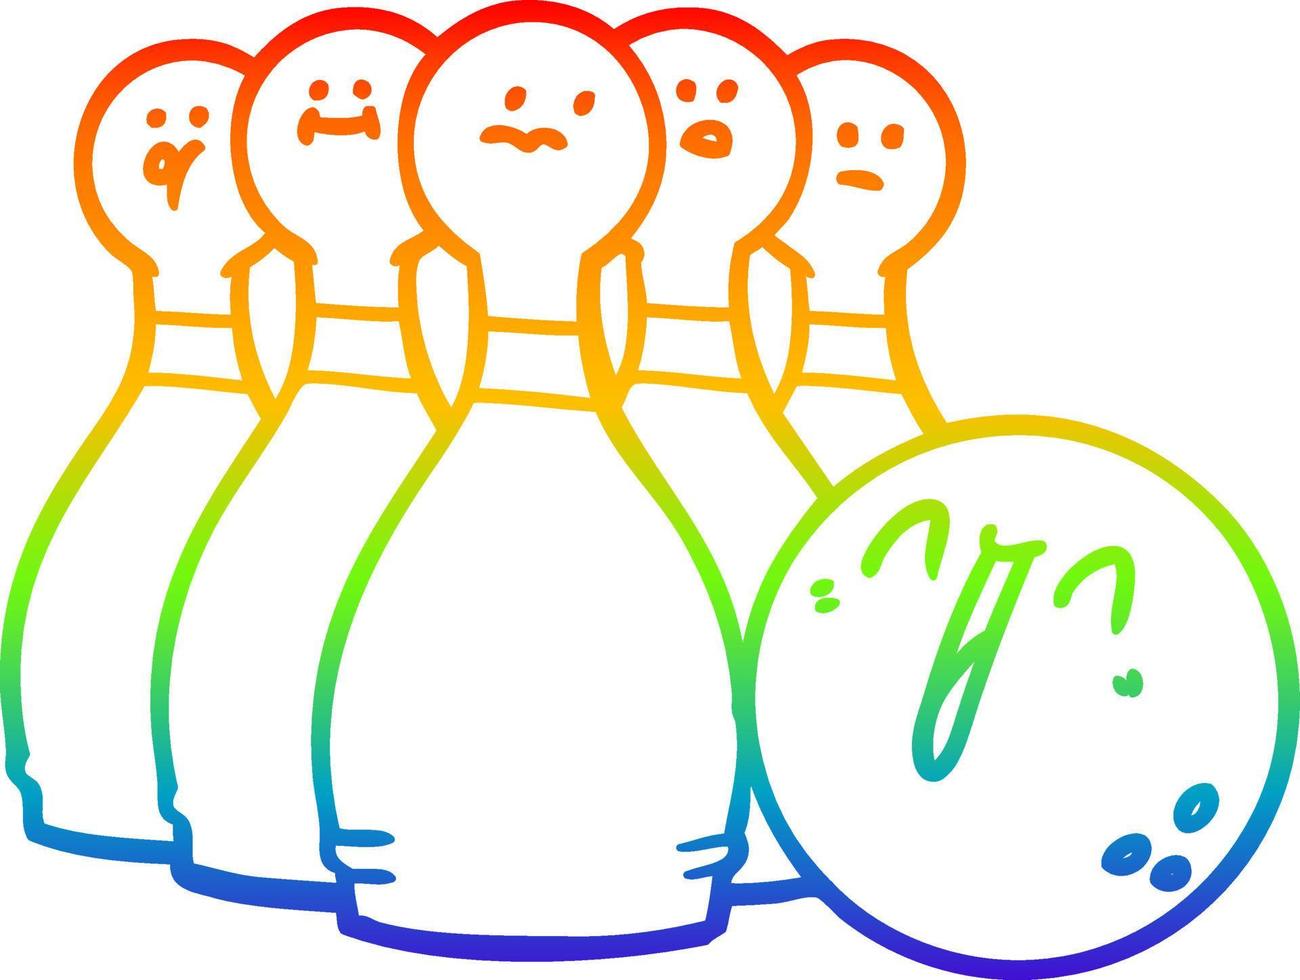 rainbow gradient line drawing cartoon laughing bowling ball and pins vector